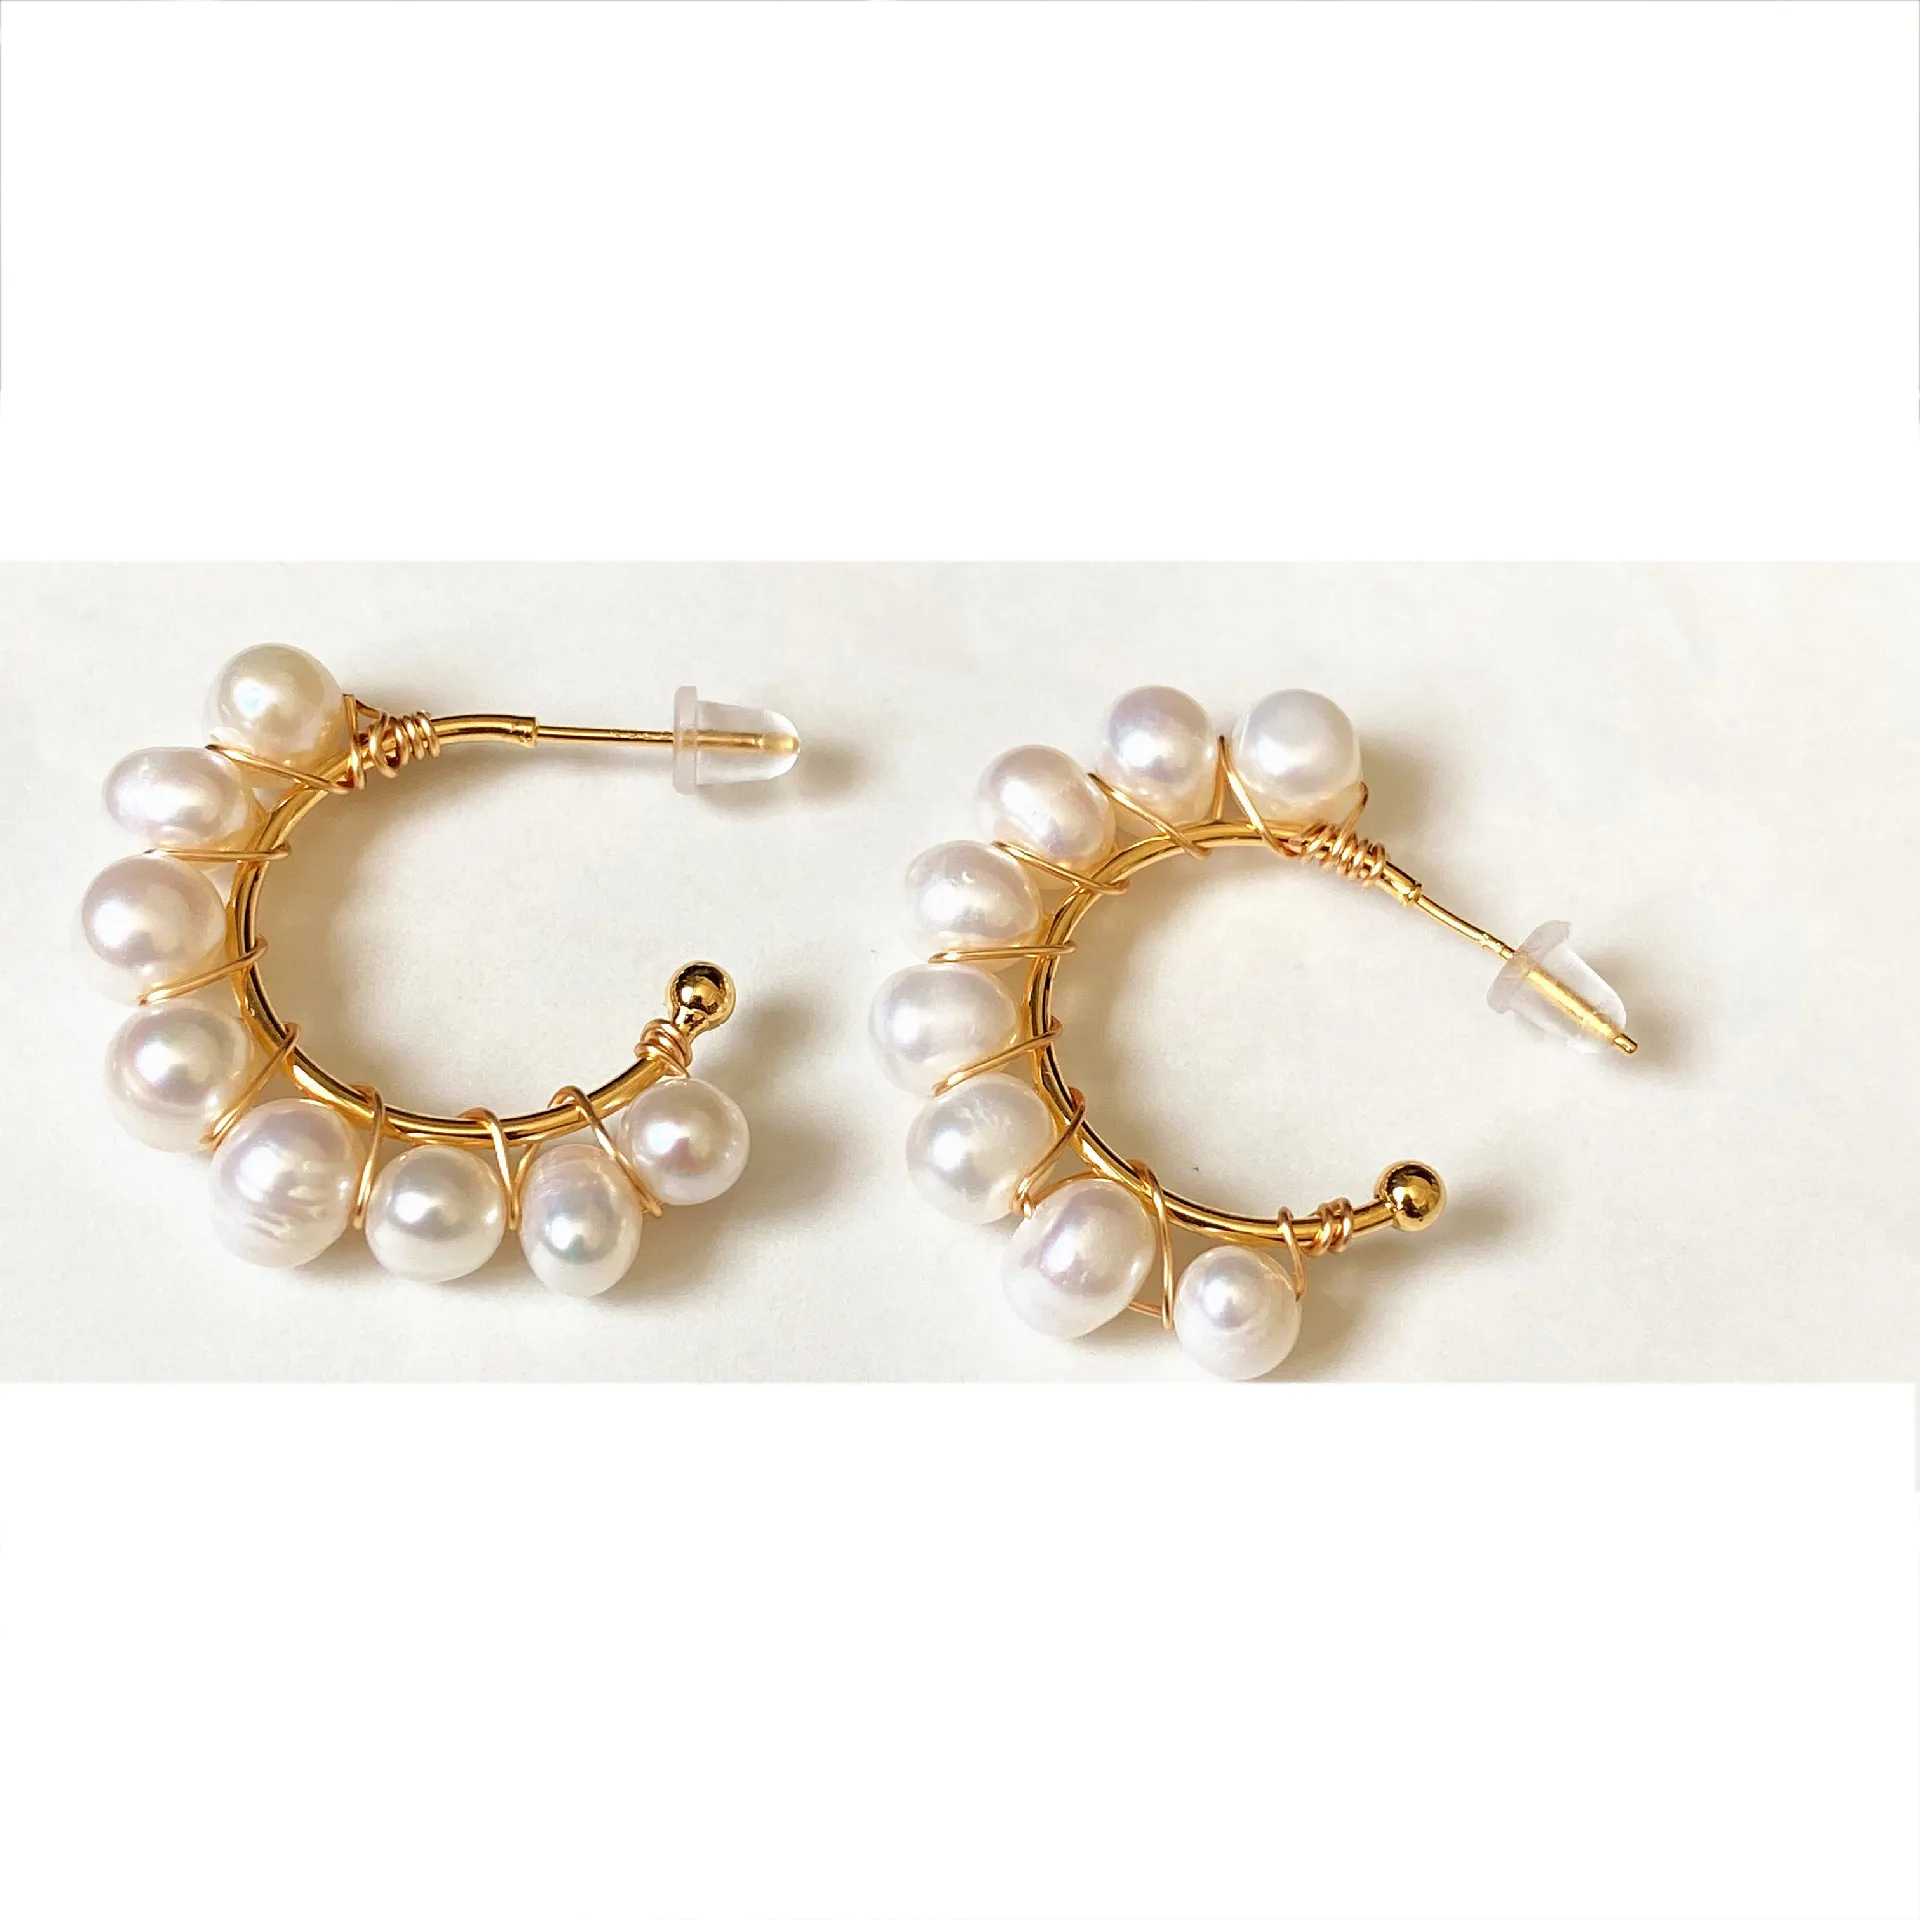 14K Gold Wire Natural Color Tourmaline And White Pearl Earrings Accessories